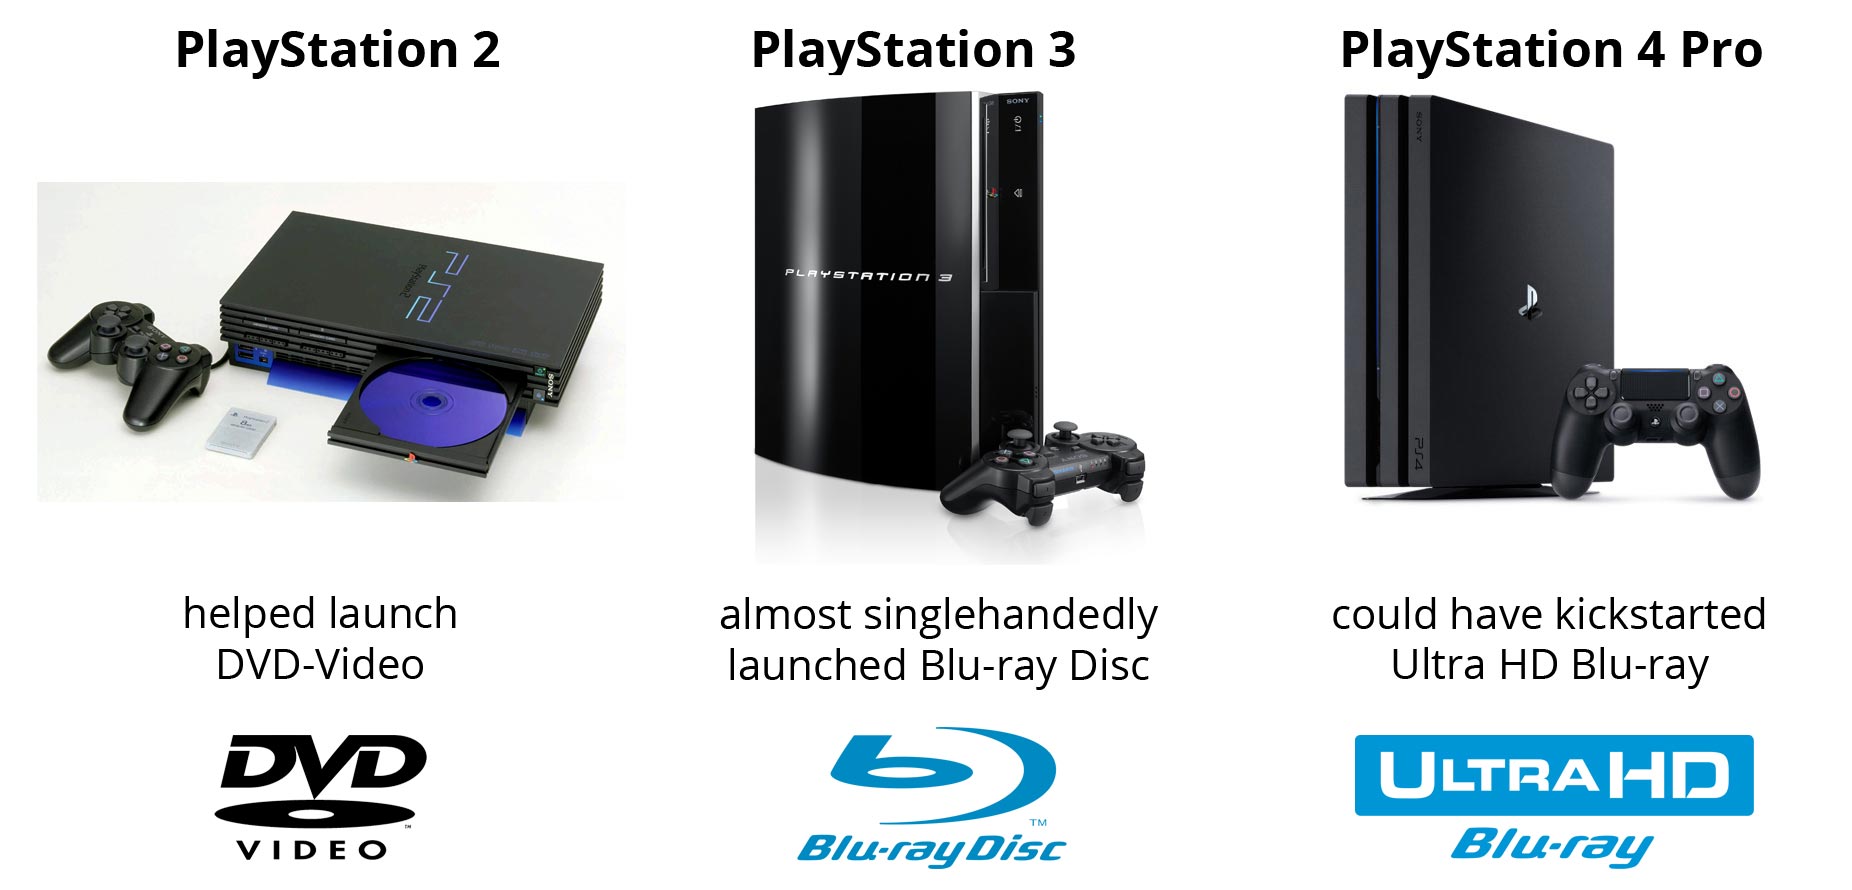 5 reasons why the PS4 Pro should have an Ultra HD Blu-ray drive -  FlatpanelsHD